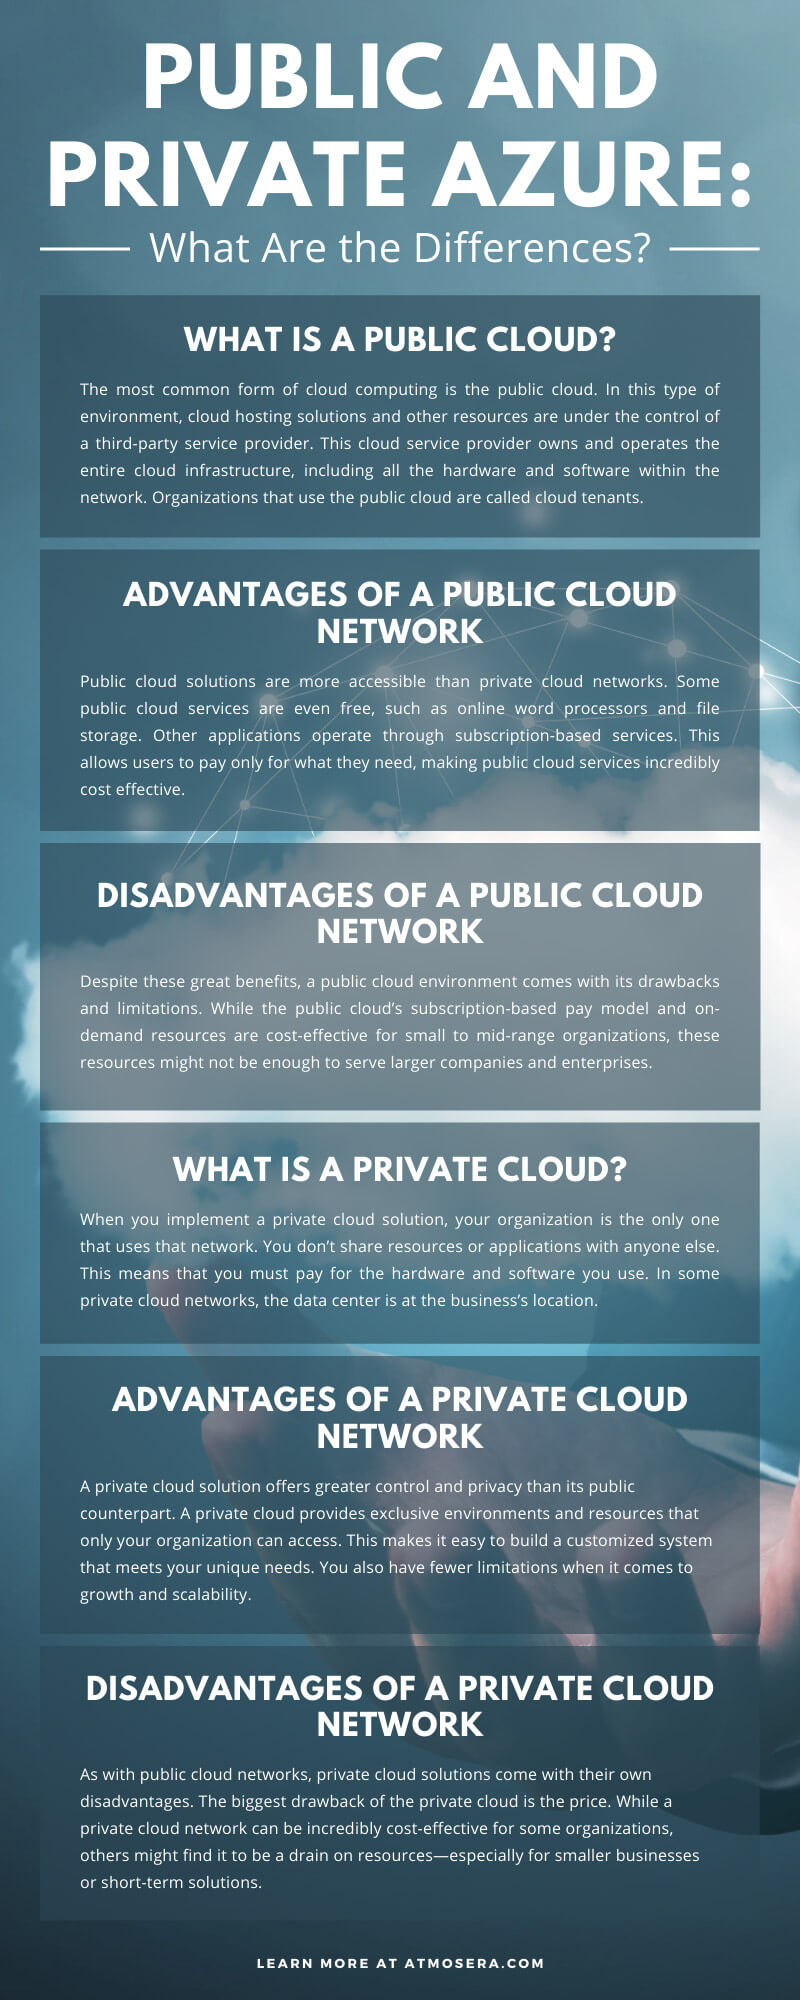 Public and Private Azure: What Are the Differences?